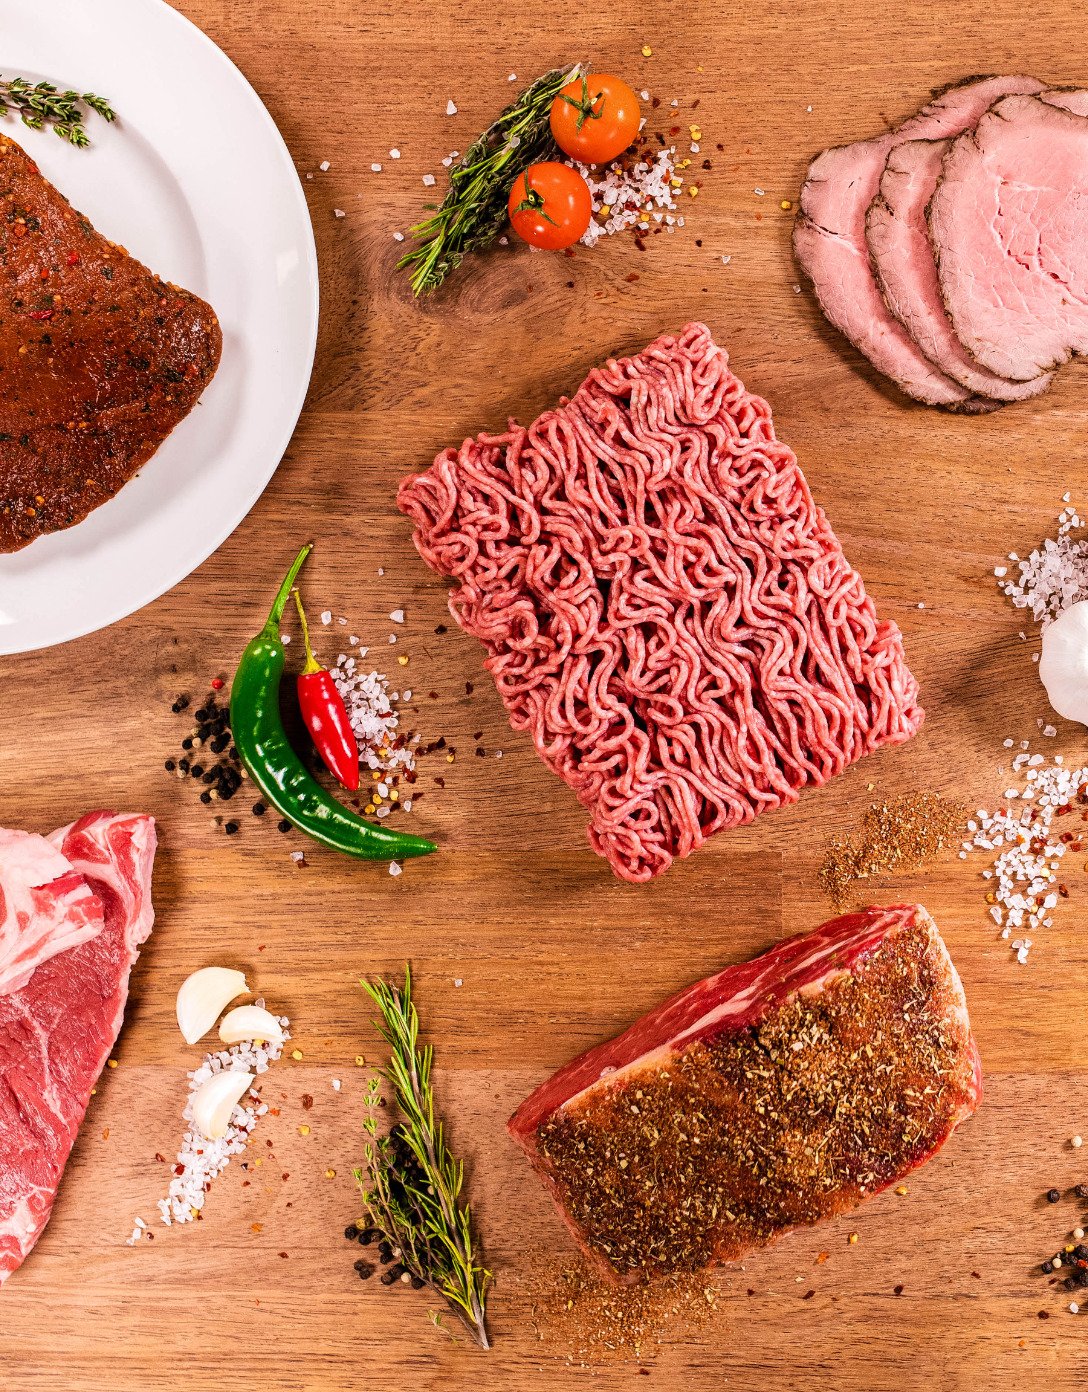 Raw and cooked meat products on a table with a variety of seasonings.